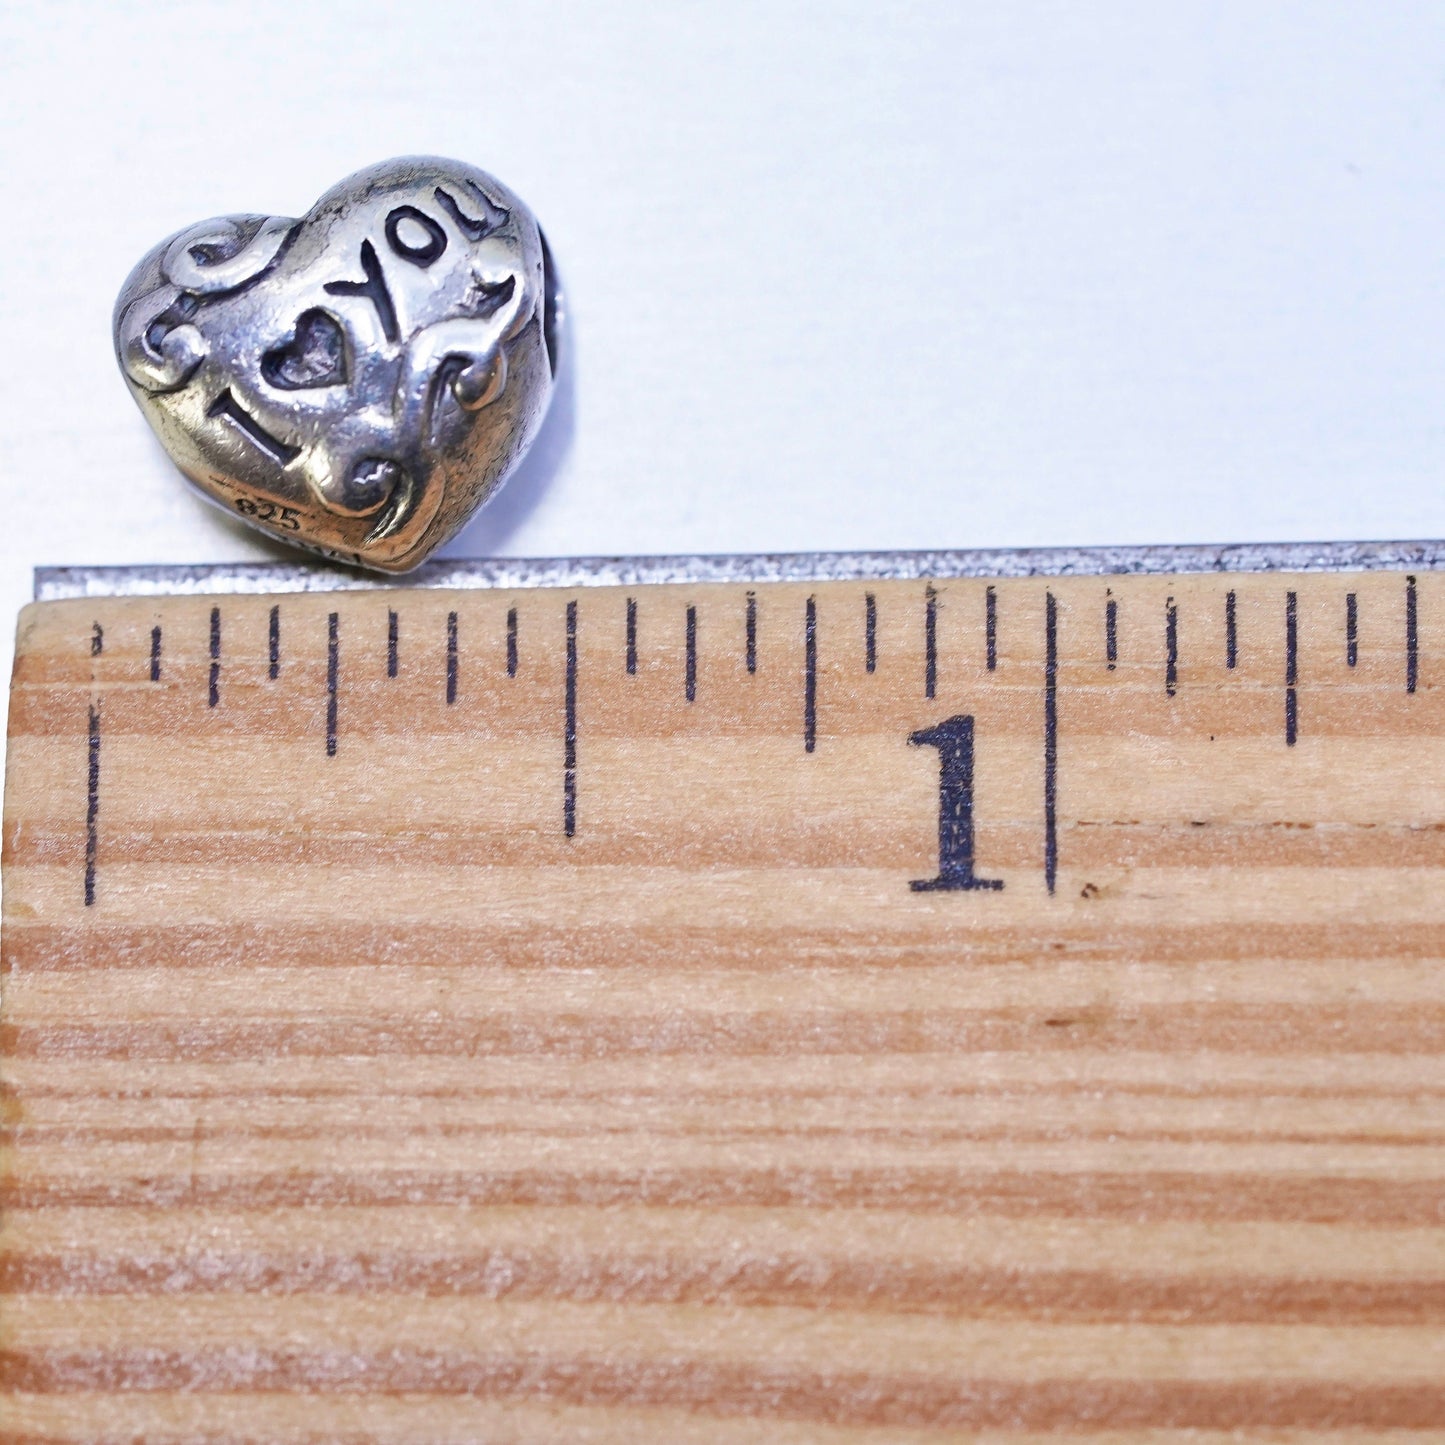 Vintage IBB Sterling silver bead charm, 925 heart pendant embossed i love you